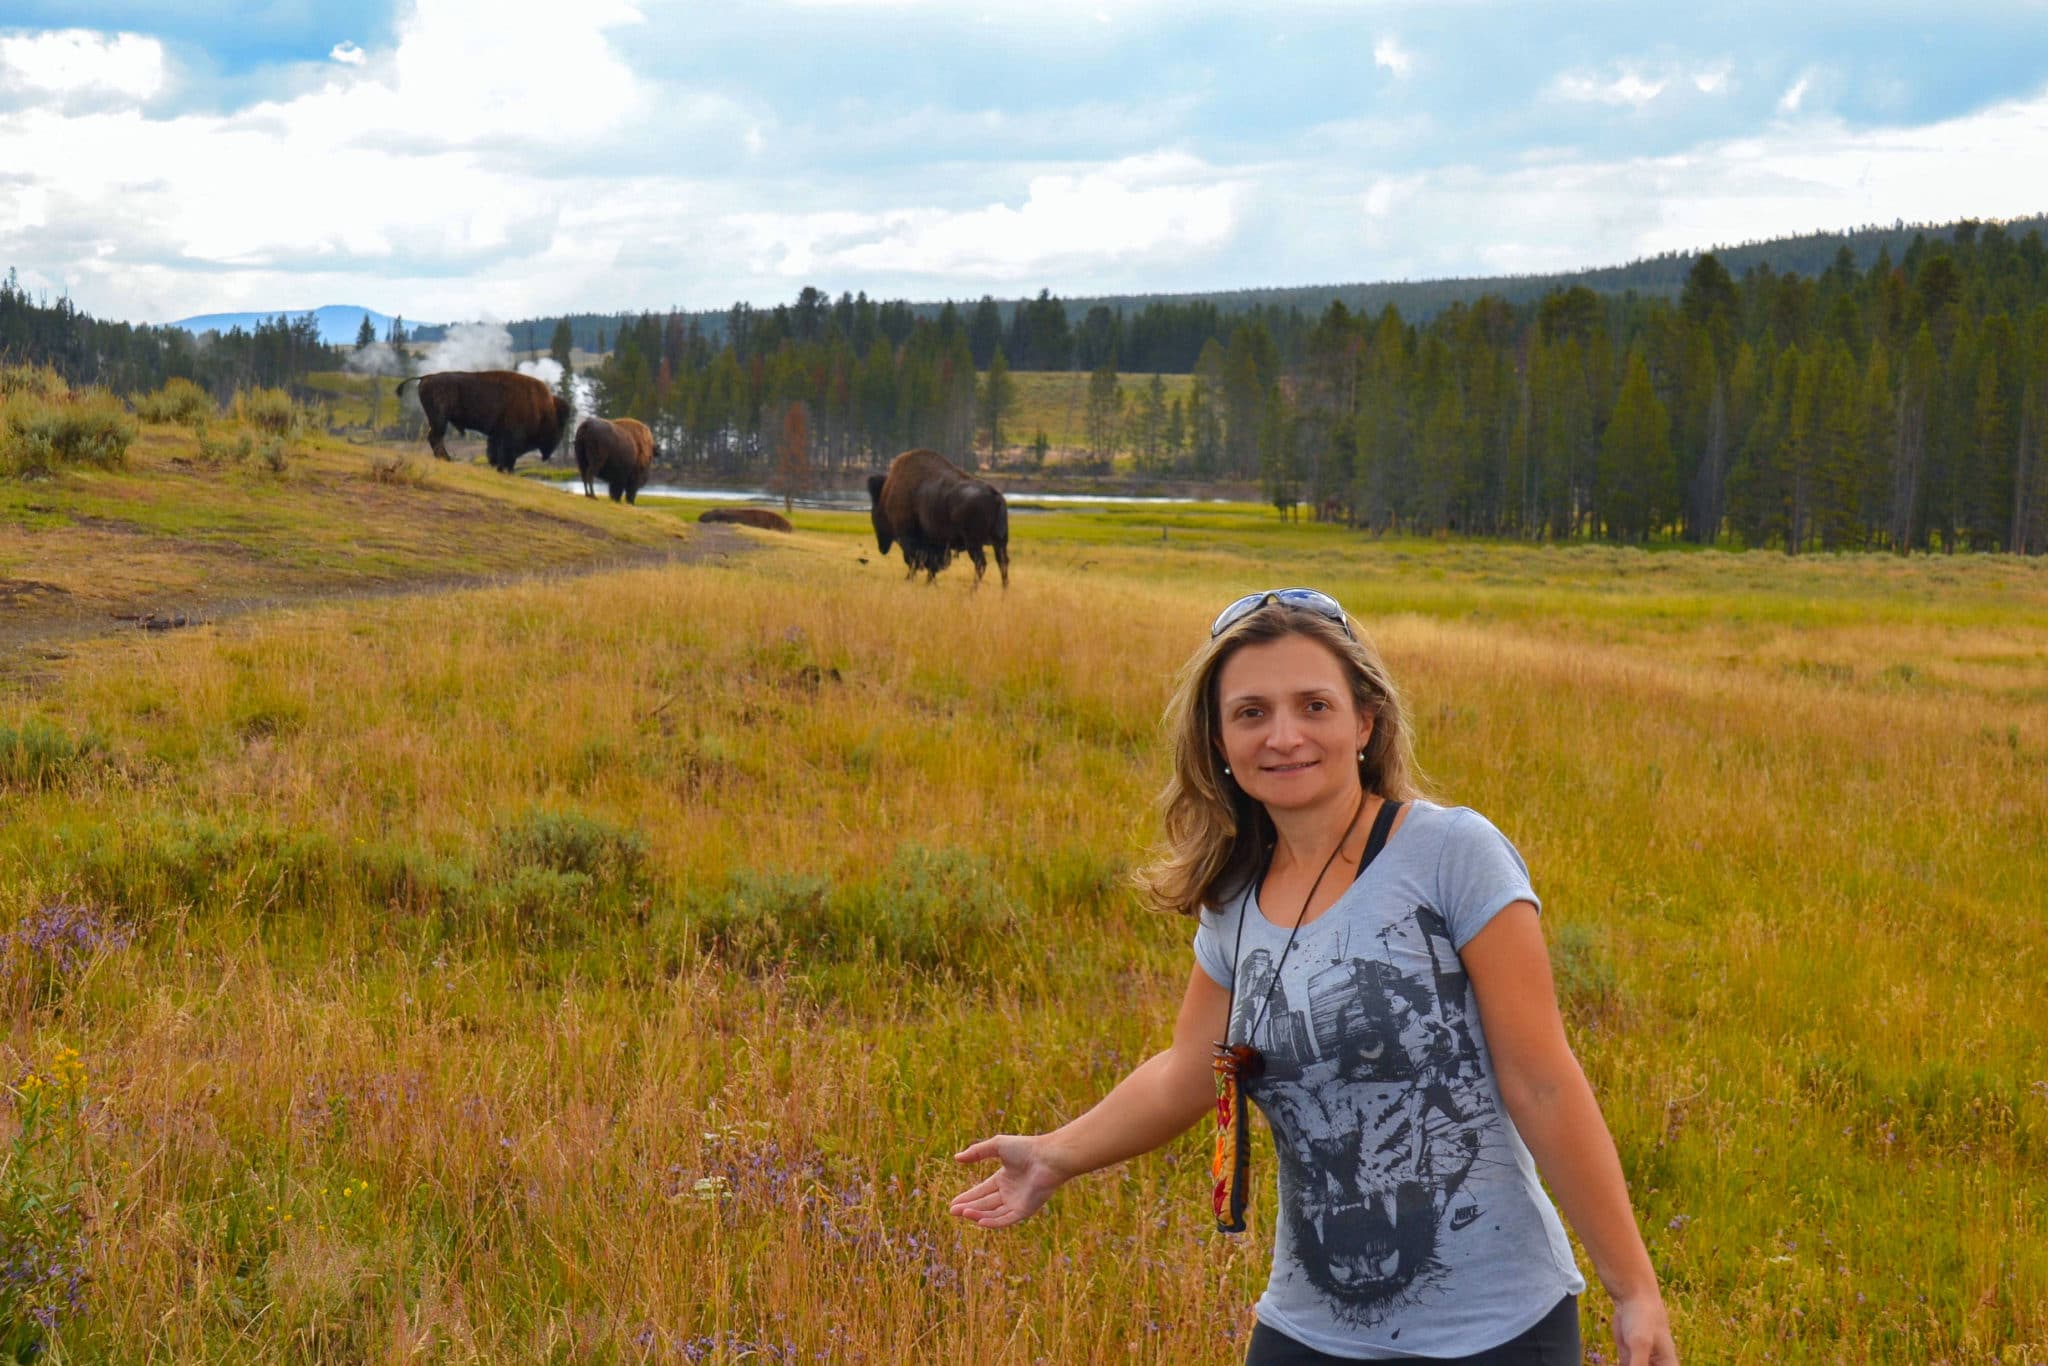 Posing with bison in Yellowstone